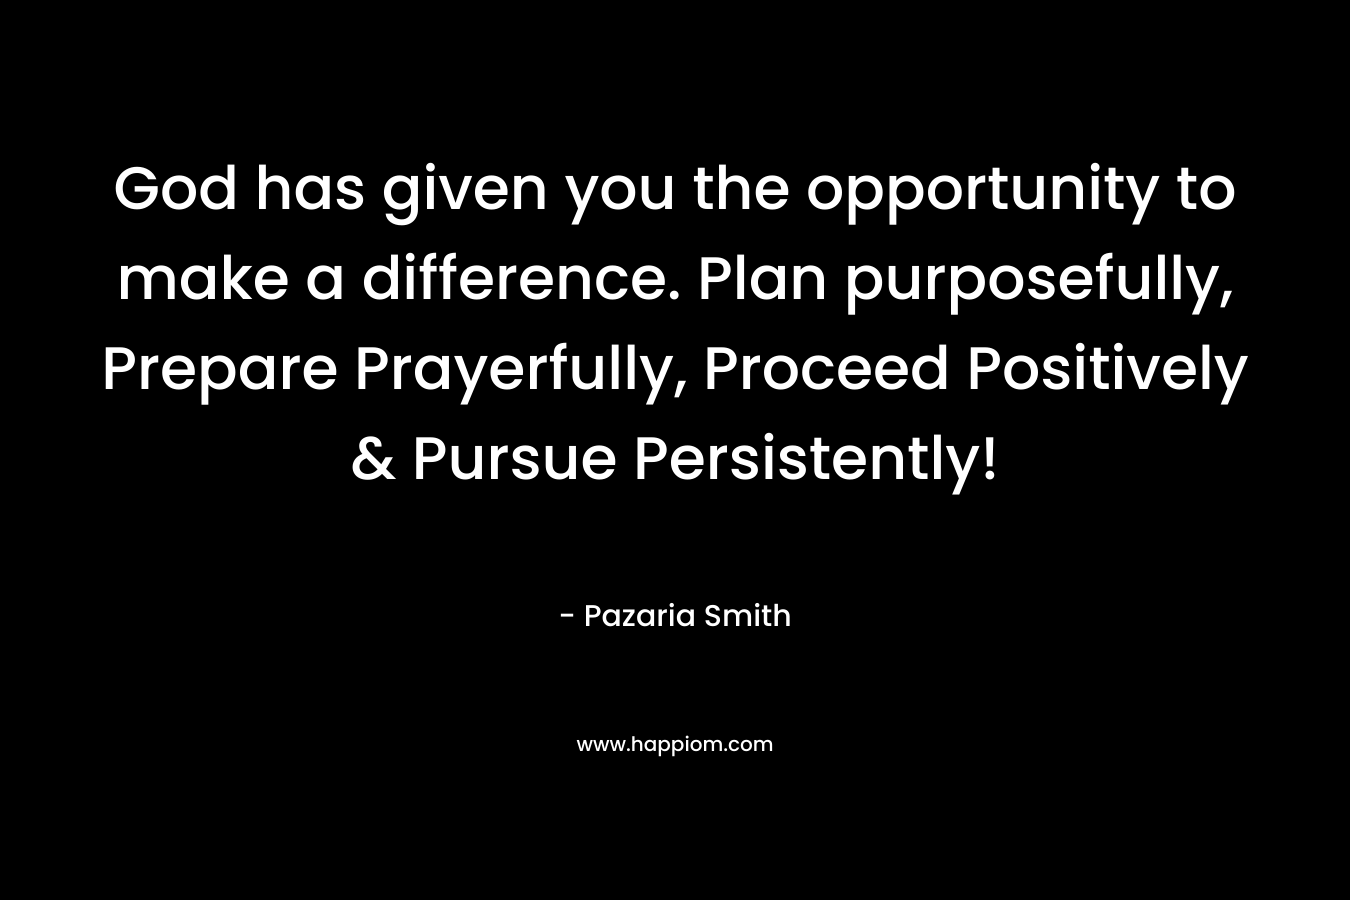 God has given you the opportunity to make a difference. Plan purposefully, Prepare Prayerfully, Proceed Positively & Pursue Persistently!